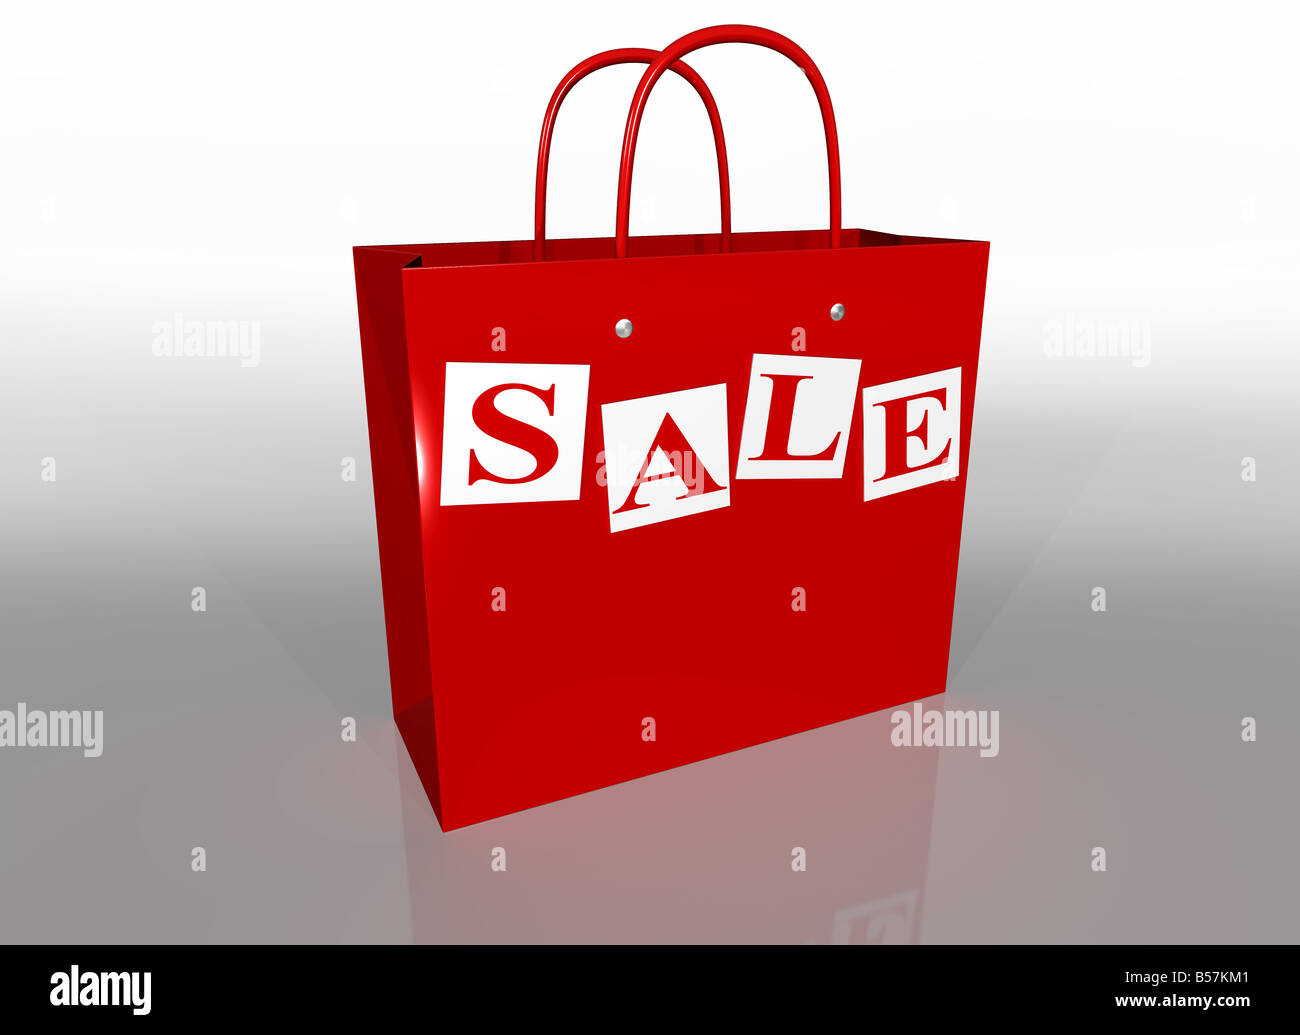 Illustration of a shopping bag in a sale Stock Photo